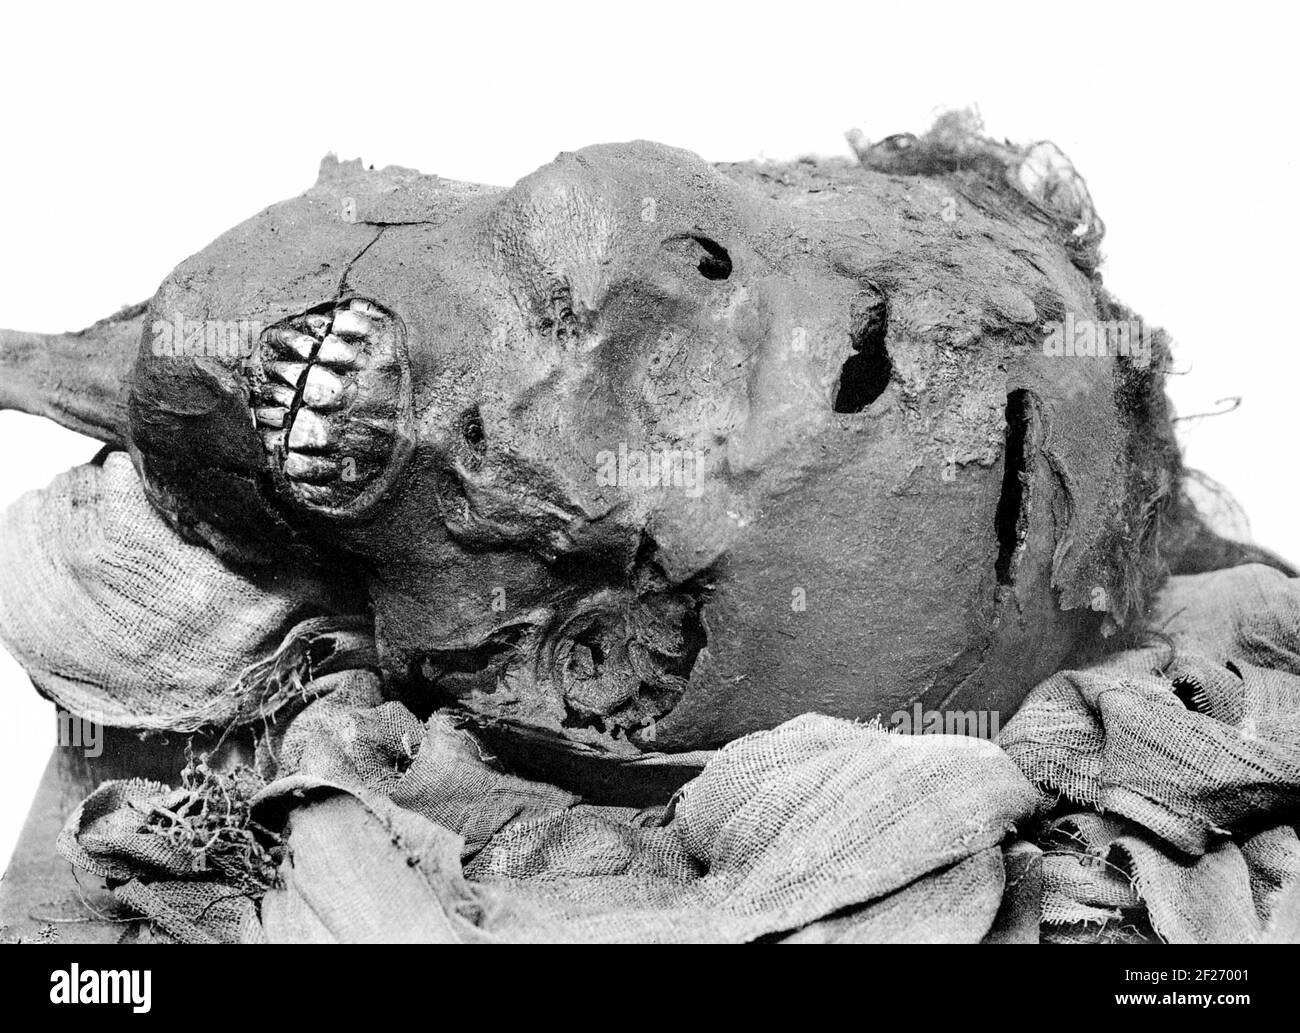 Pharaoh Seqenenre Tao. Mummified head of Seqenenre depicting his wounds. The cut above his eye was made by another weapon, most probably some sort of dagger. Seqenenre Tao (also Seqenera Djehuty-aa or Sekenenra Taa) ruled over the last of the local kingdoms of the Theban region of Egypt in the Seventeenth Dynasty during the Second Intermediate Period. Stock Photo